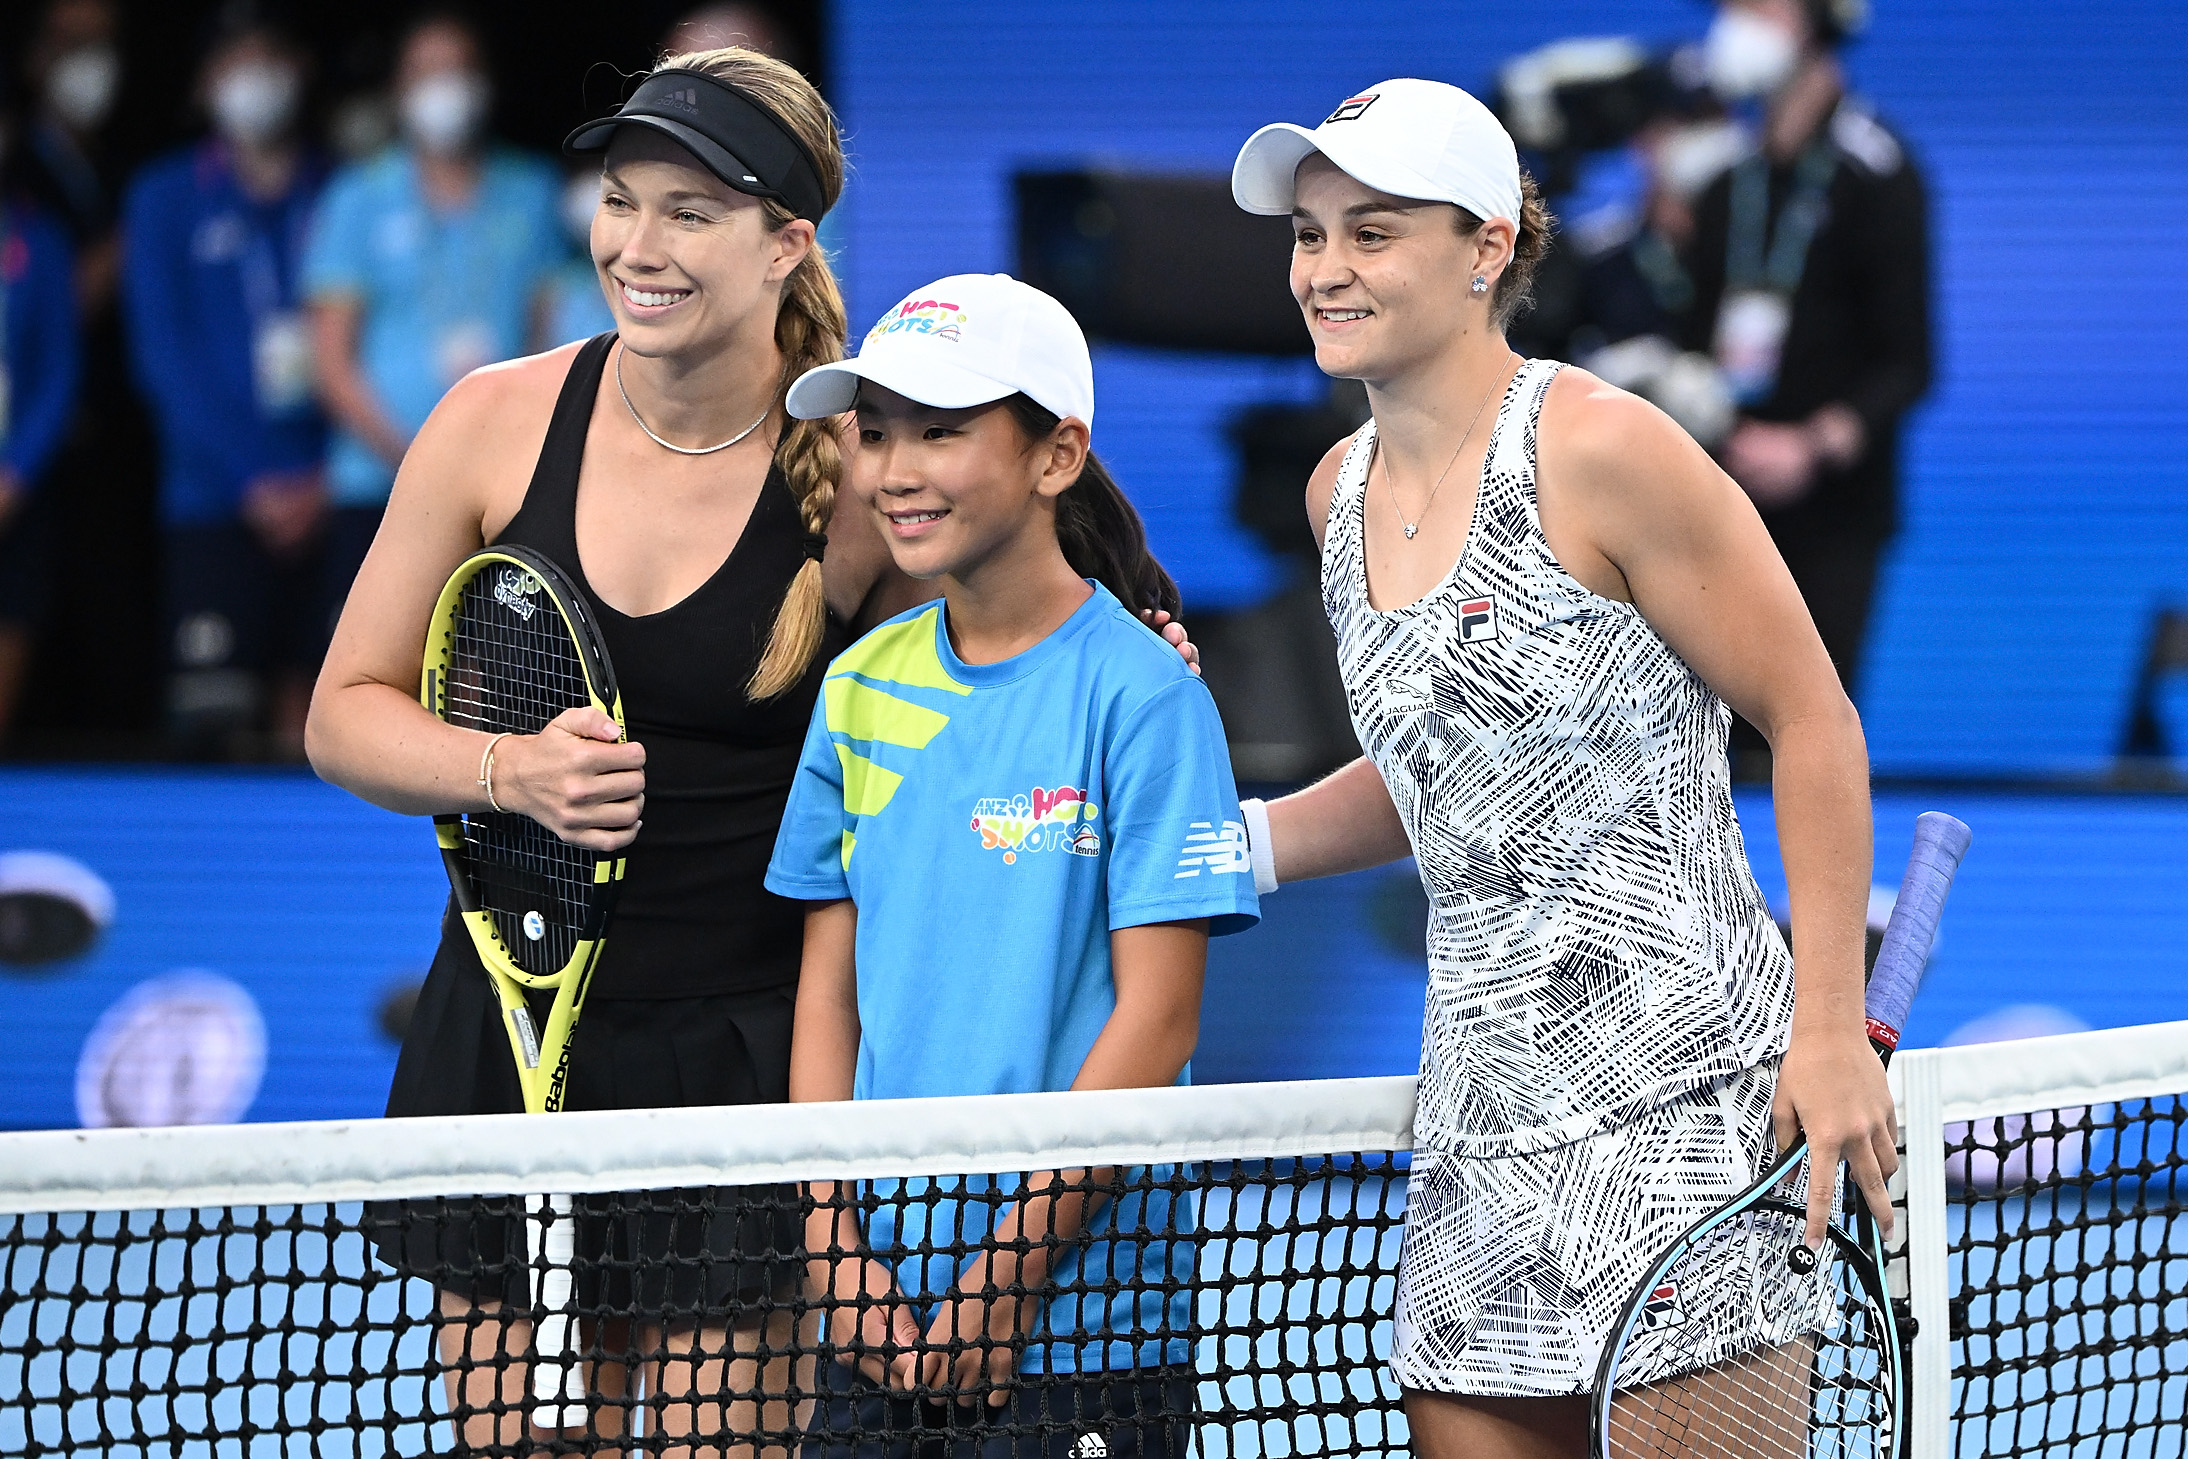 Ash Barty and Danielle Collins pose for a photograph ahead of their women’s singles final match during Day 13 of the 2022 Australian Open at Melbourne Park